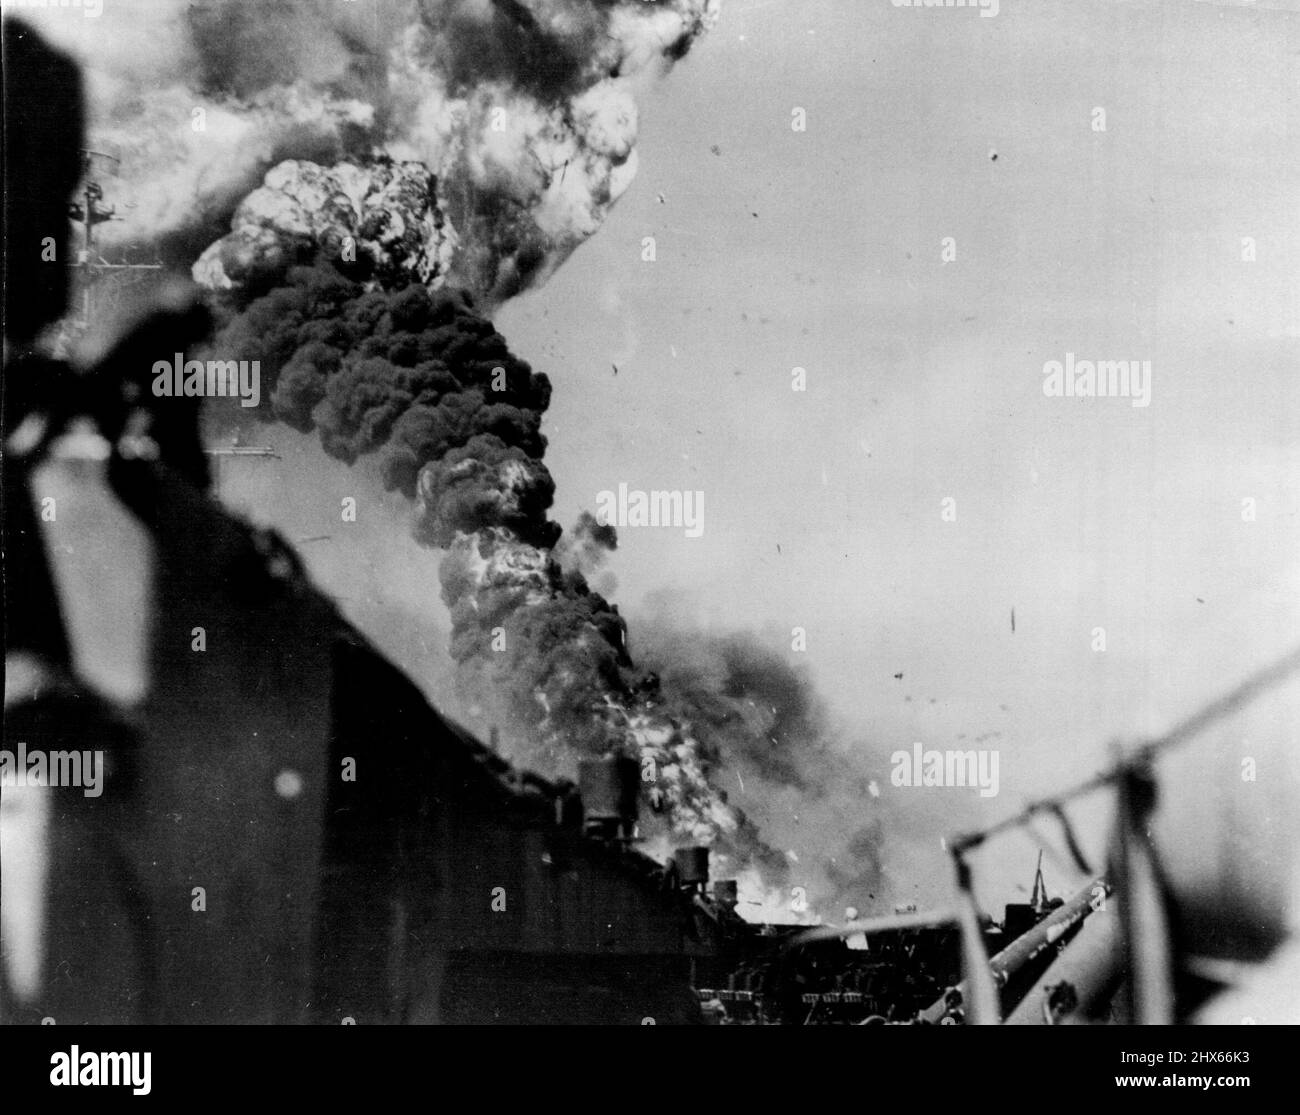 Flame and smoke rise from the deck of the aircraft carrier USS Intrepid after she was struck by a Jap suicide plane off the coast of Luzon on November 25. It was the efforts of her veteran crew that saved the ship from becoming a floating pyre. July 21, 1945. (Photo by Associated Press Photo). Stock Photo